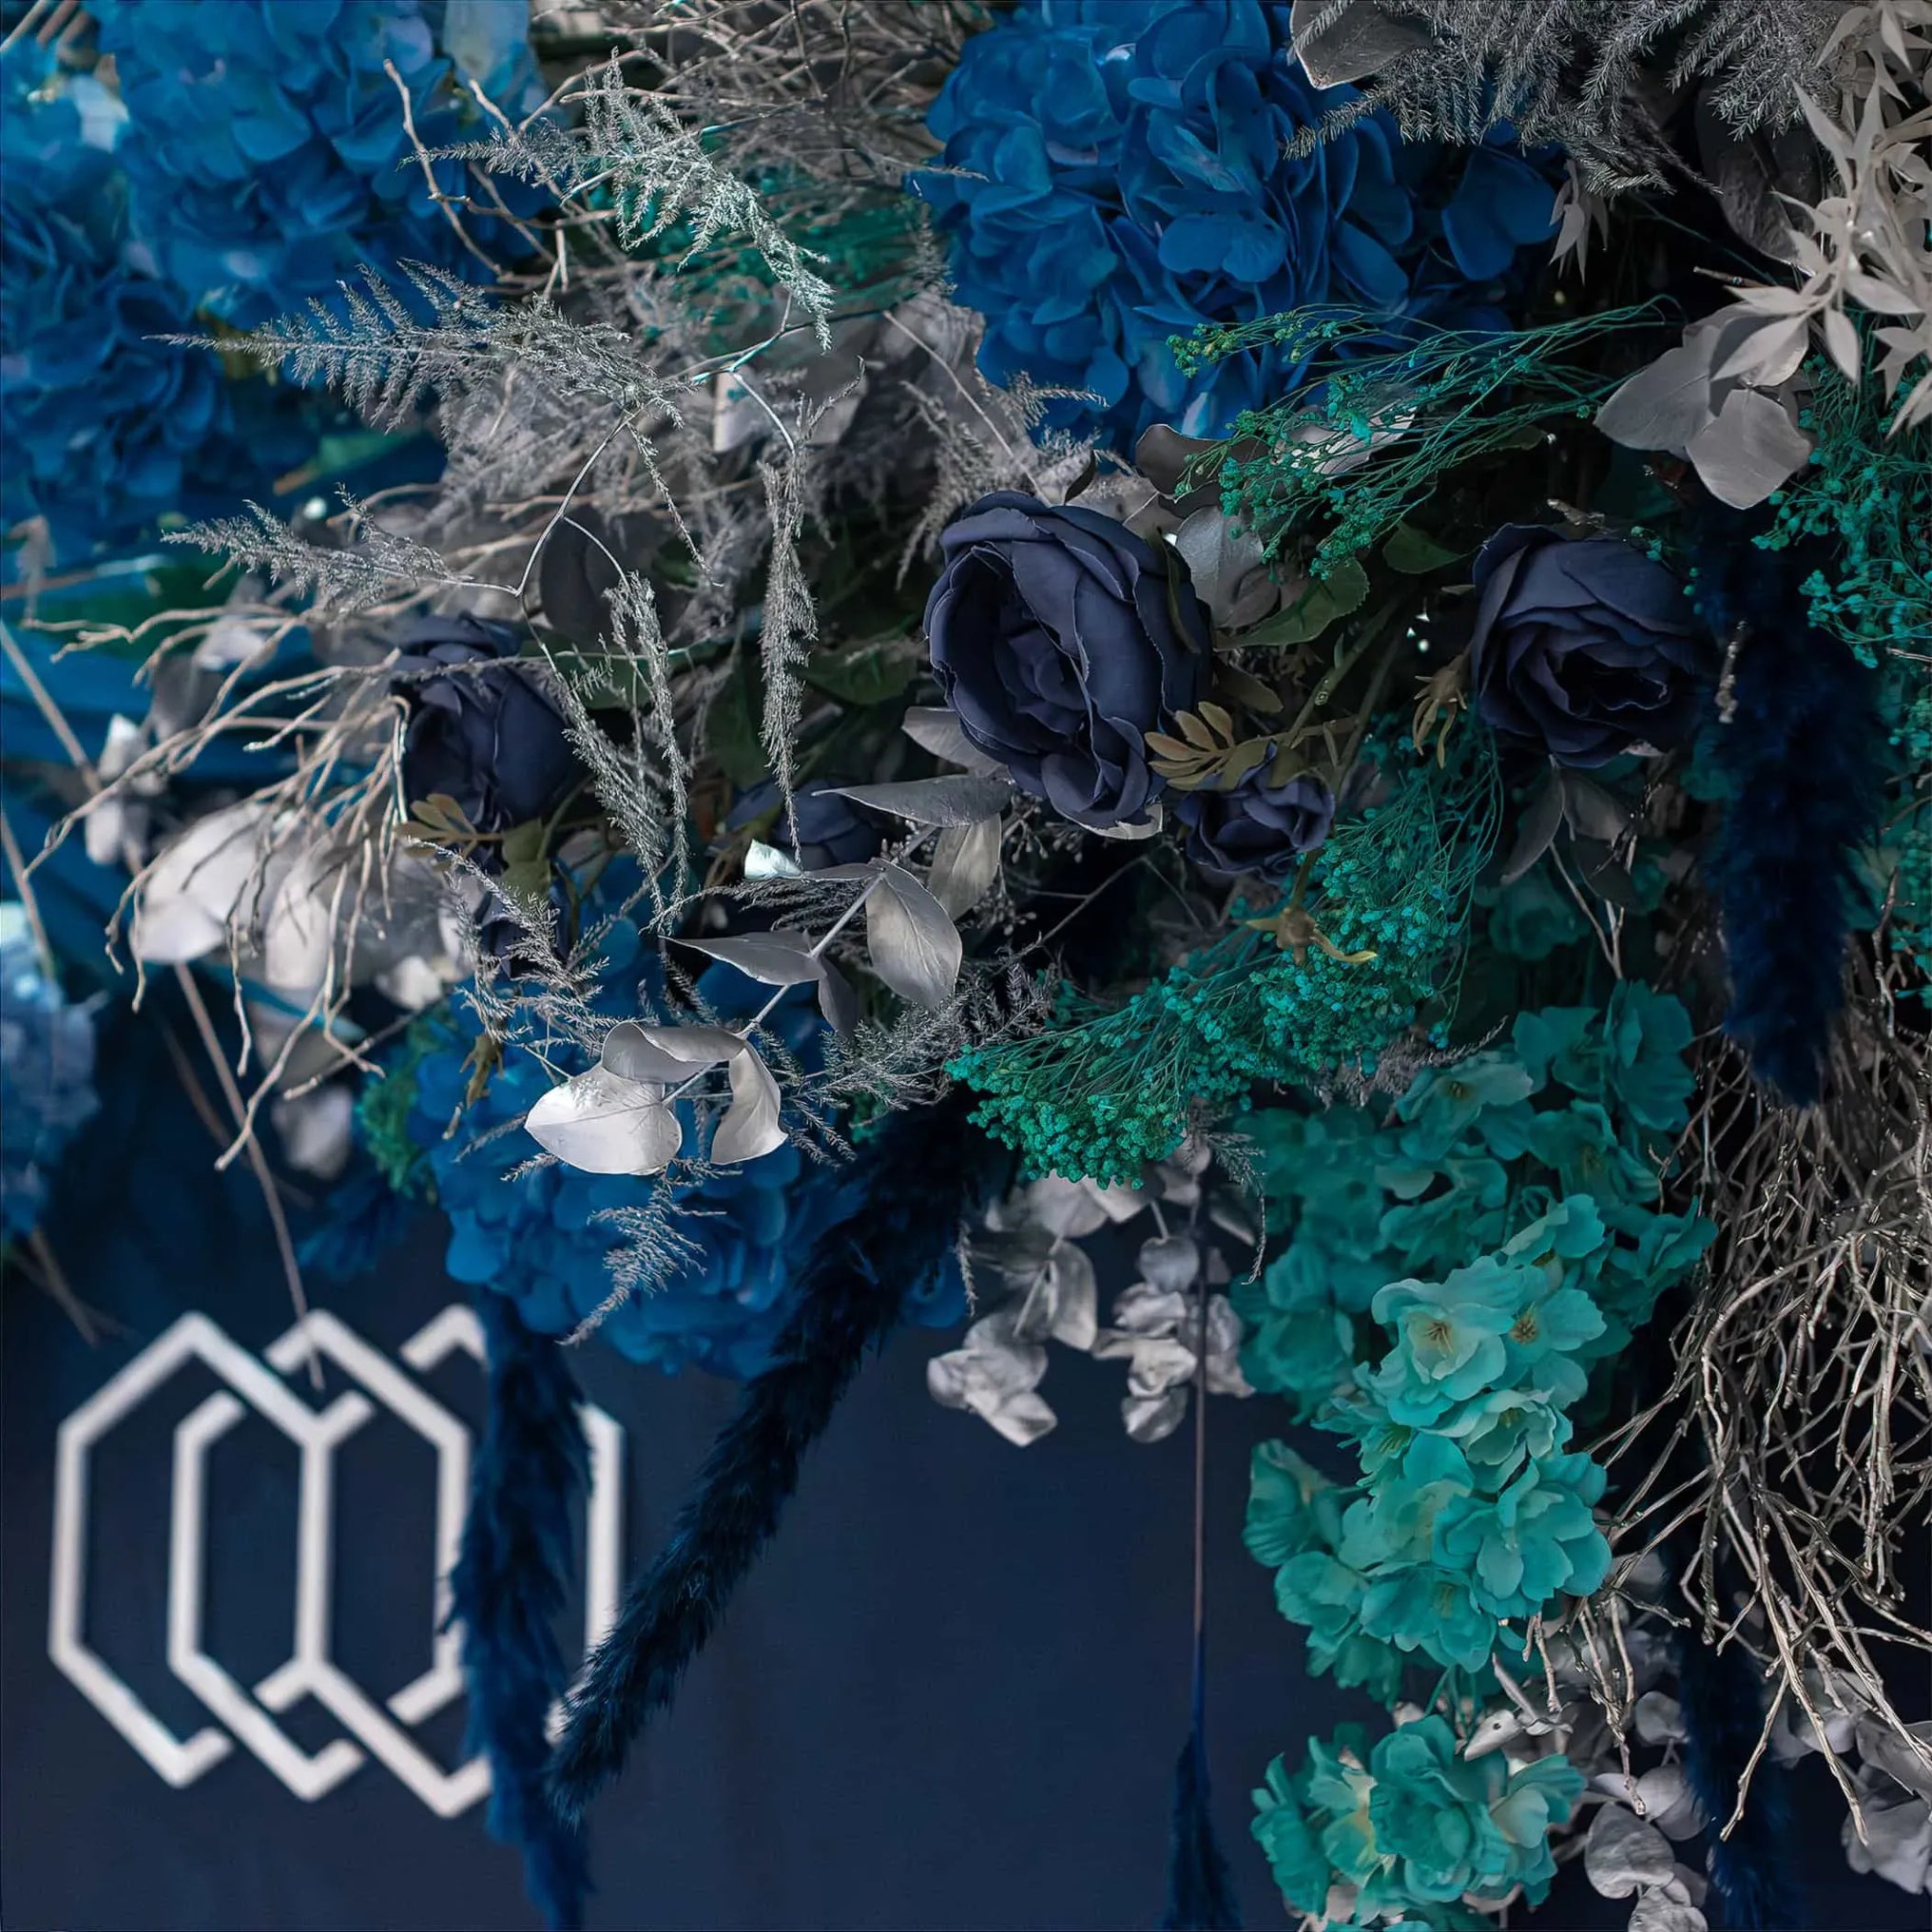 A close-up of a sophisticated botanical arrangement with navy blue floral accents, soft blue-green hydrangeas, and silvery leaves, set before a backdrop with a stylized white hexagonal INMODE logo.